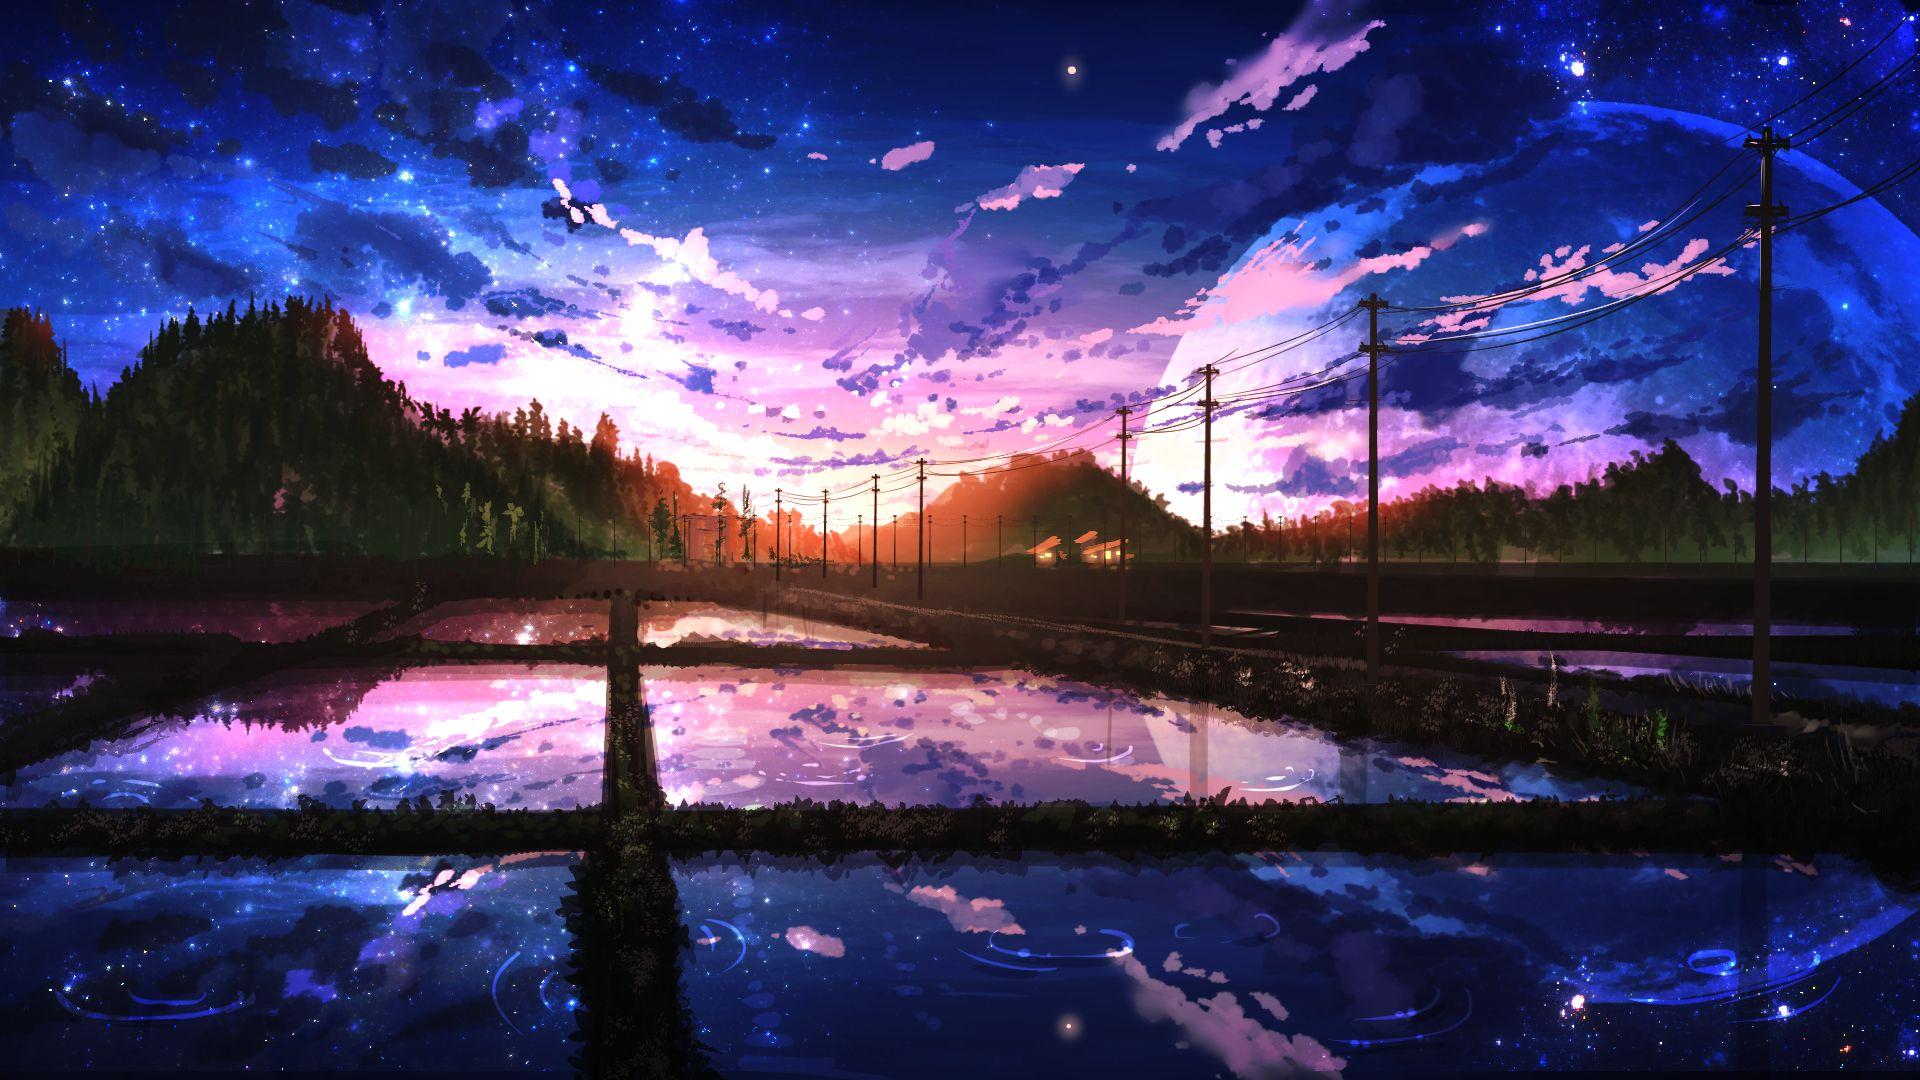 Anime Scenery Wallpapers - Top Free Anime Scenery ...